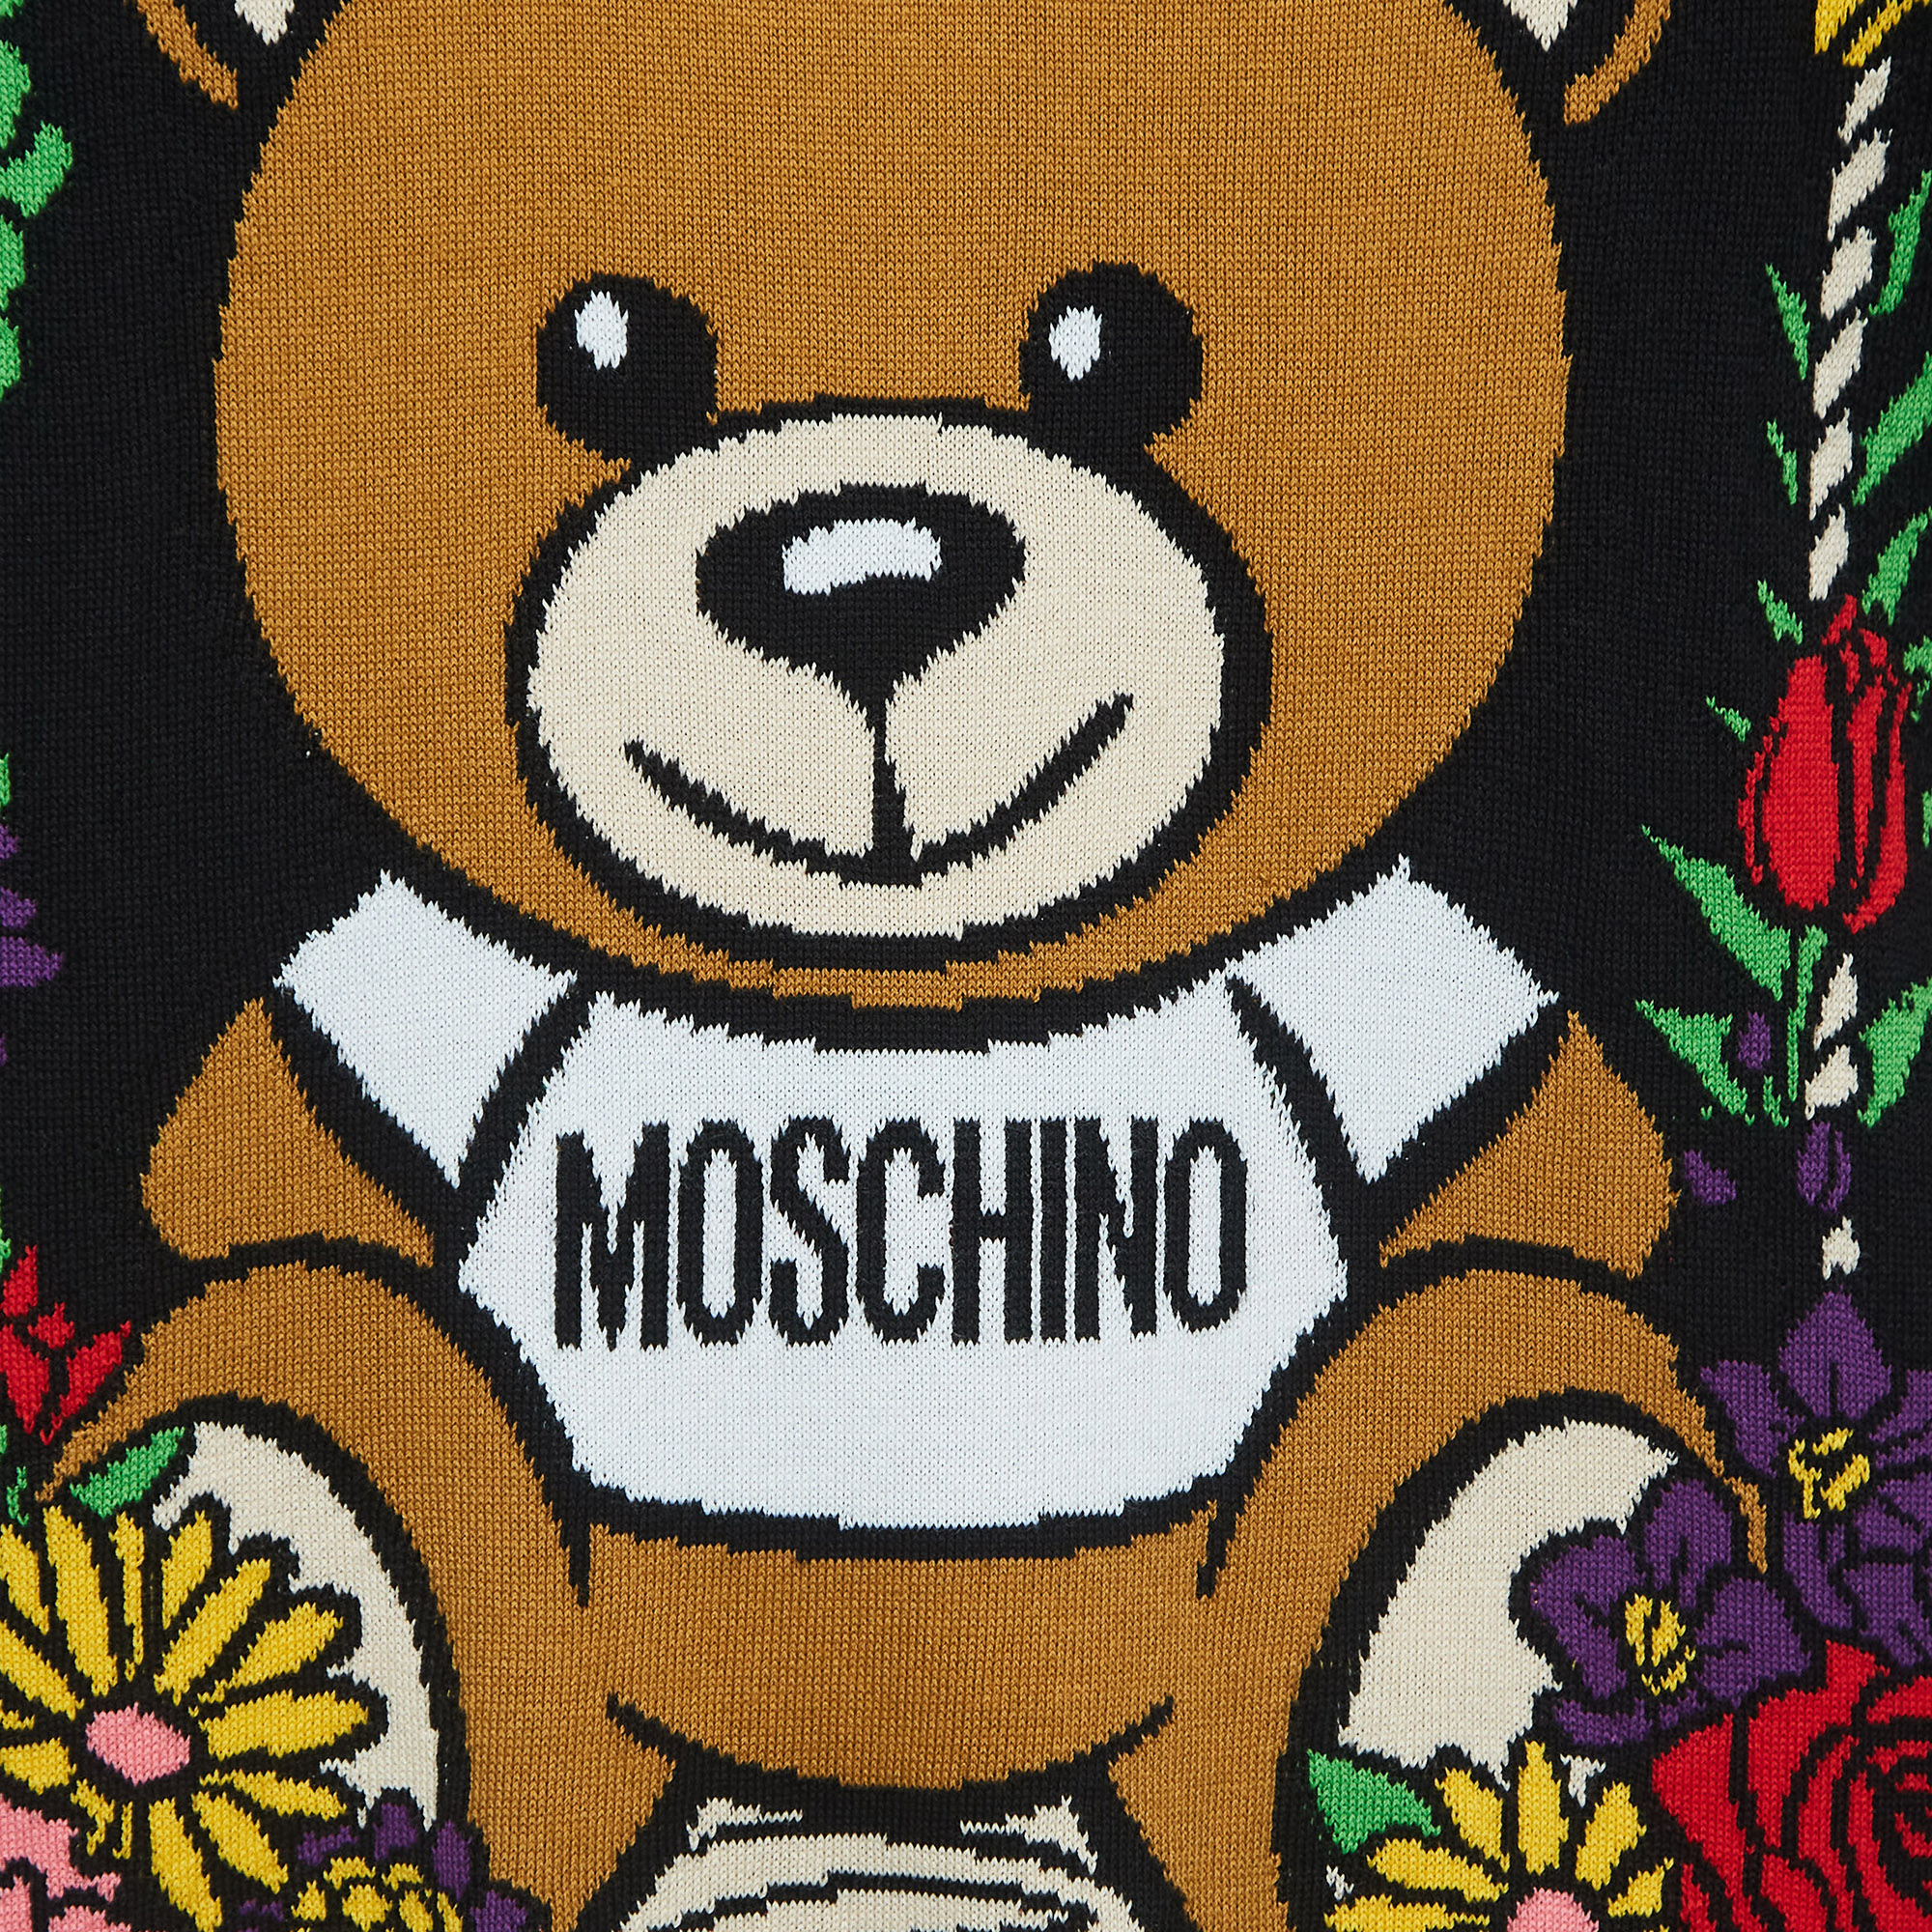 Moschino Couture Black Mesh Floral Teddy Bear Jumper L